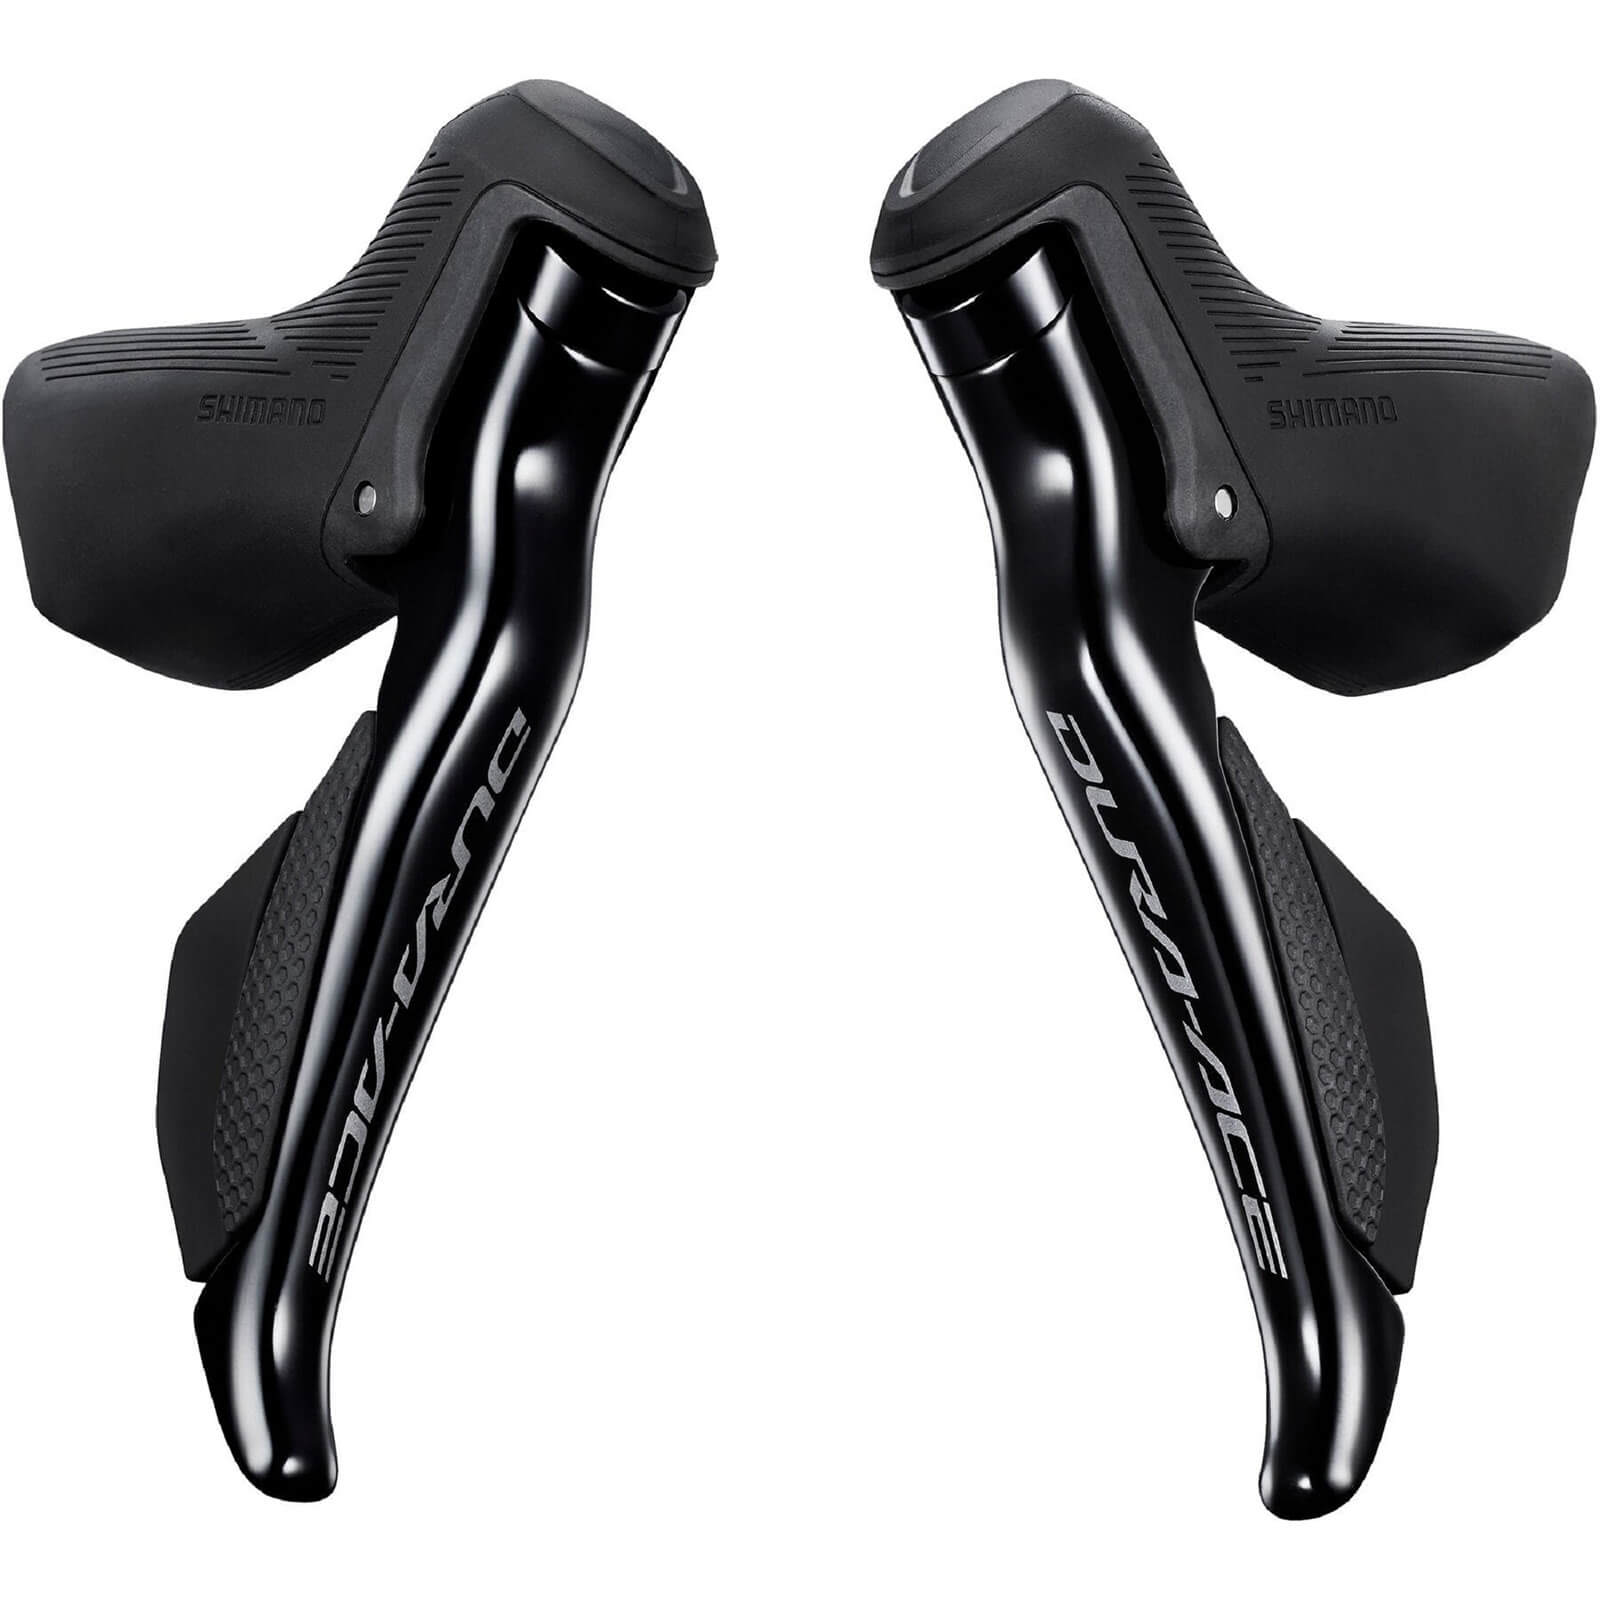 Shimano Dura-Ace ST-R9250 Gear Shift Levers - Pair